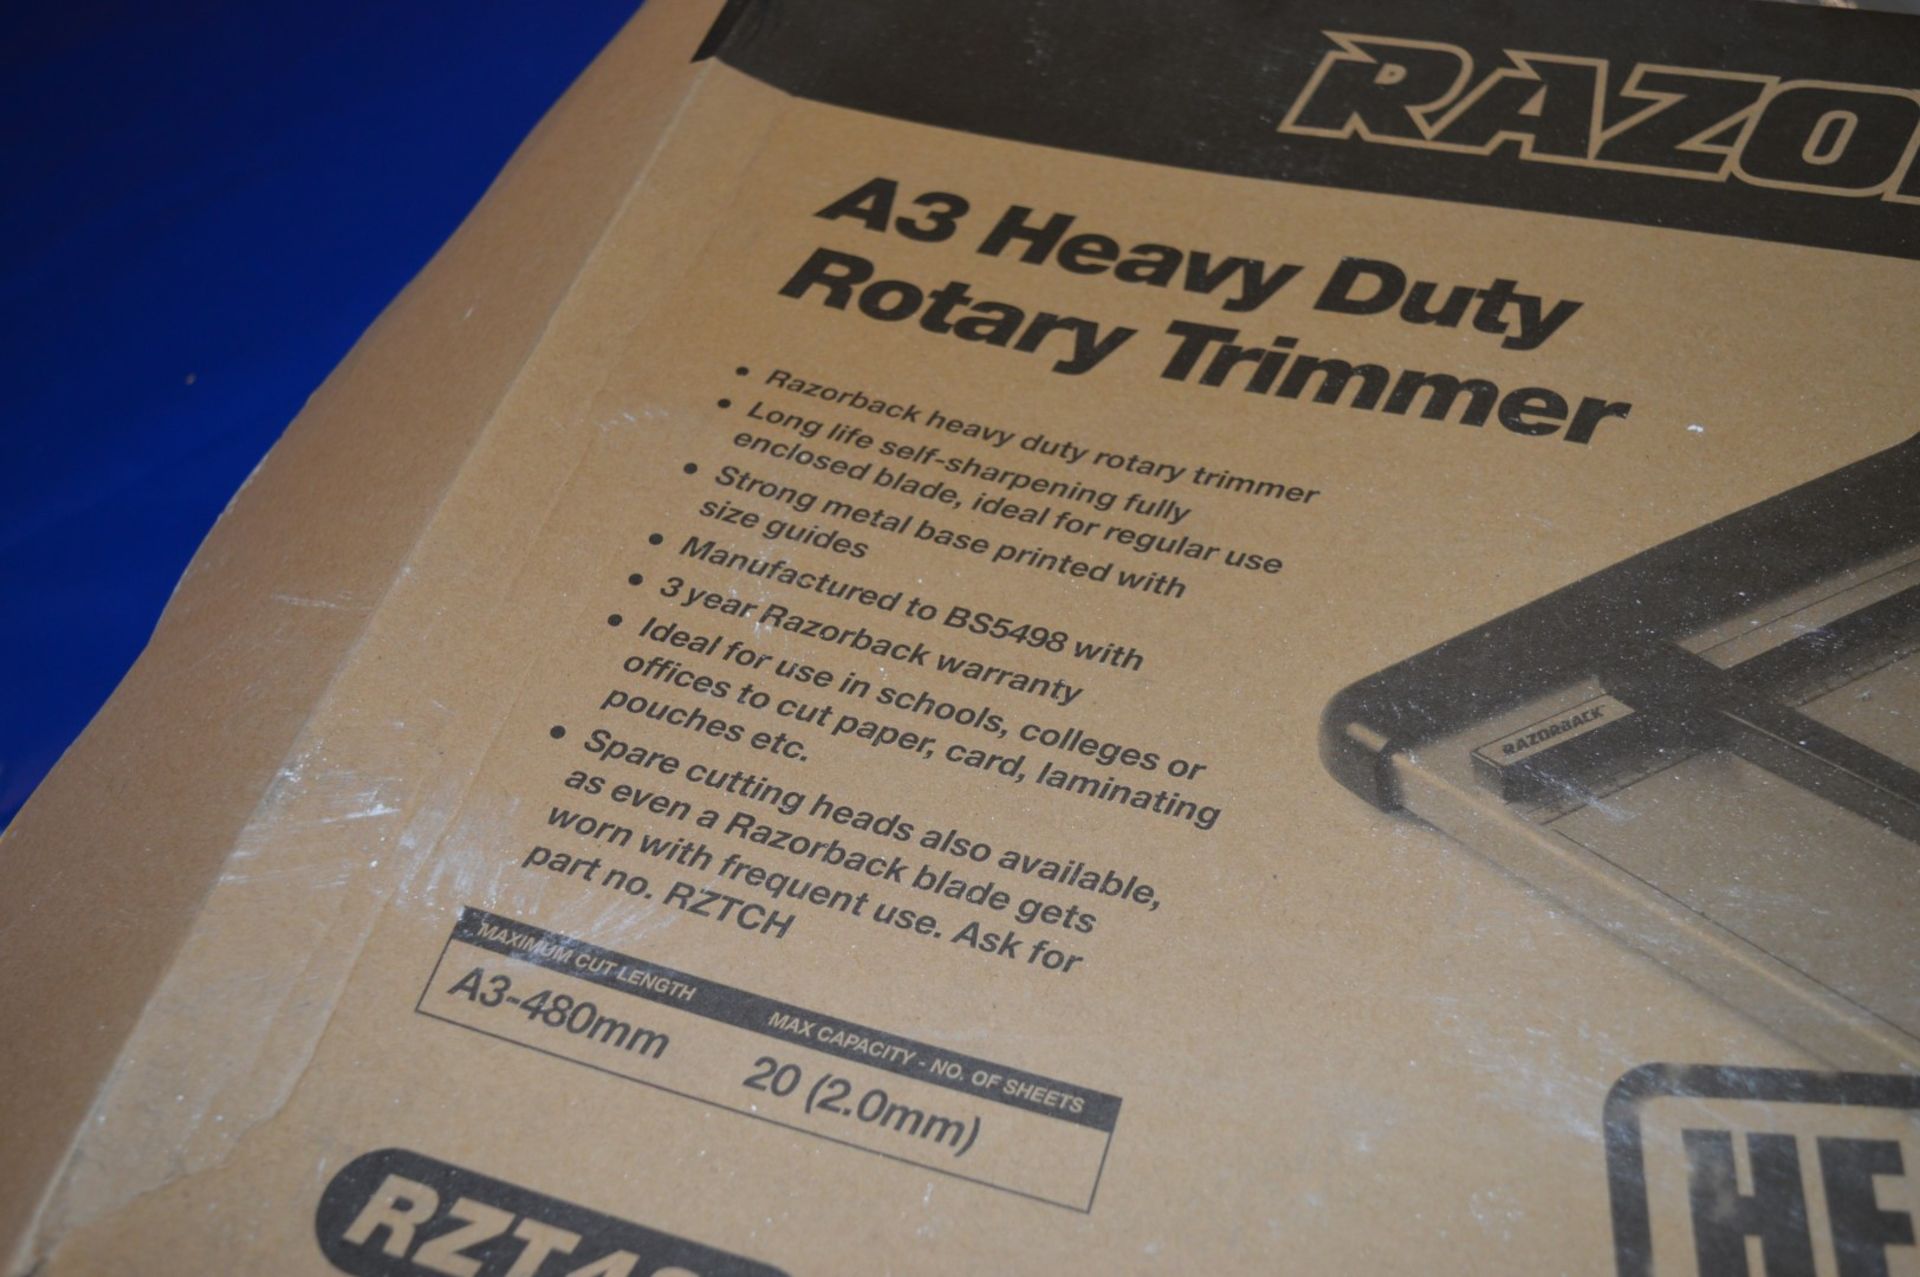 1 x Razorback A3 Heavy Duty Rotary Paper Trimmer - Unused in Original Box - Self Sharpening - Strong - Image 3 of 7